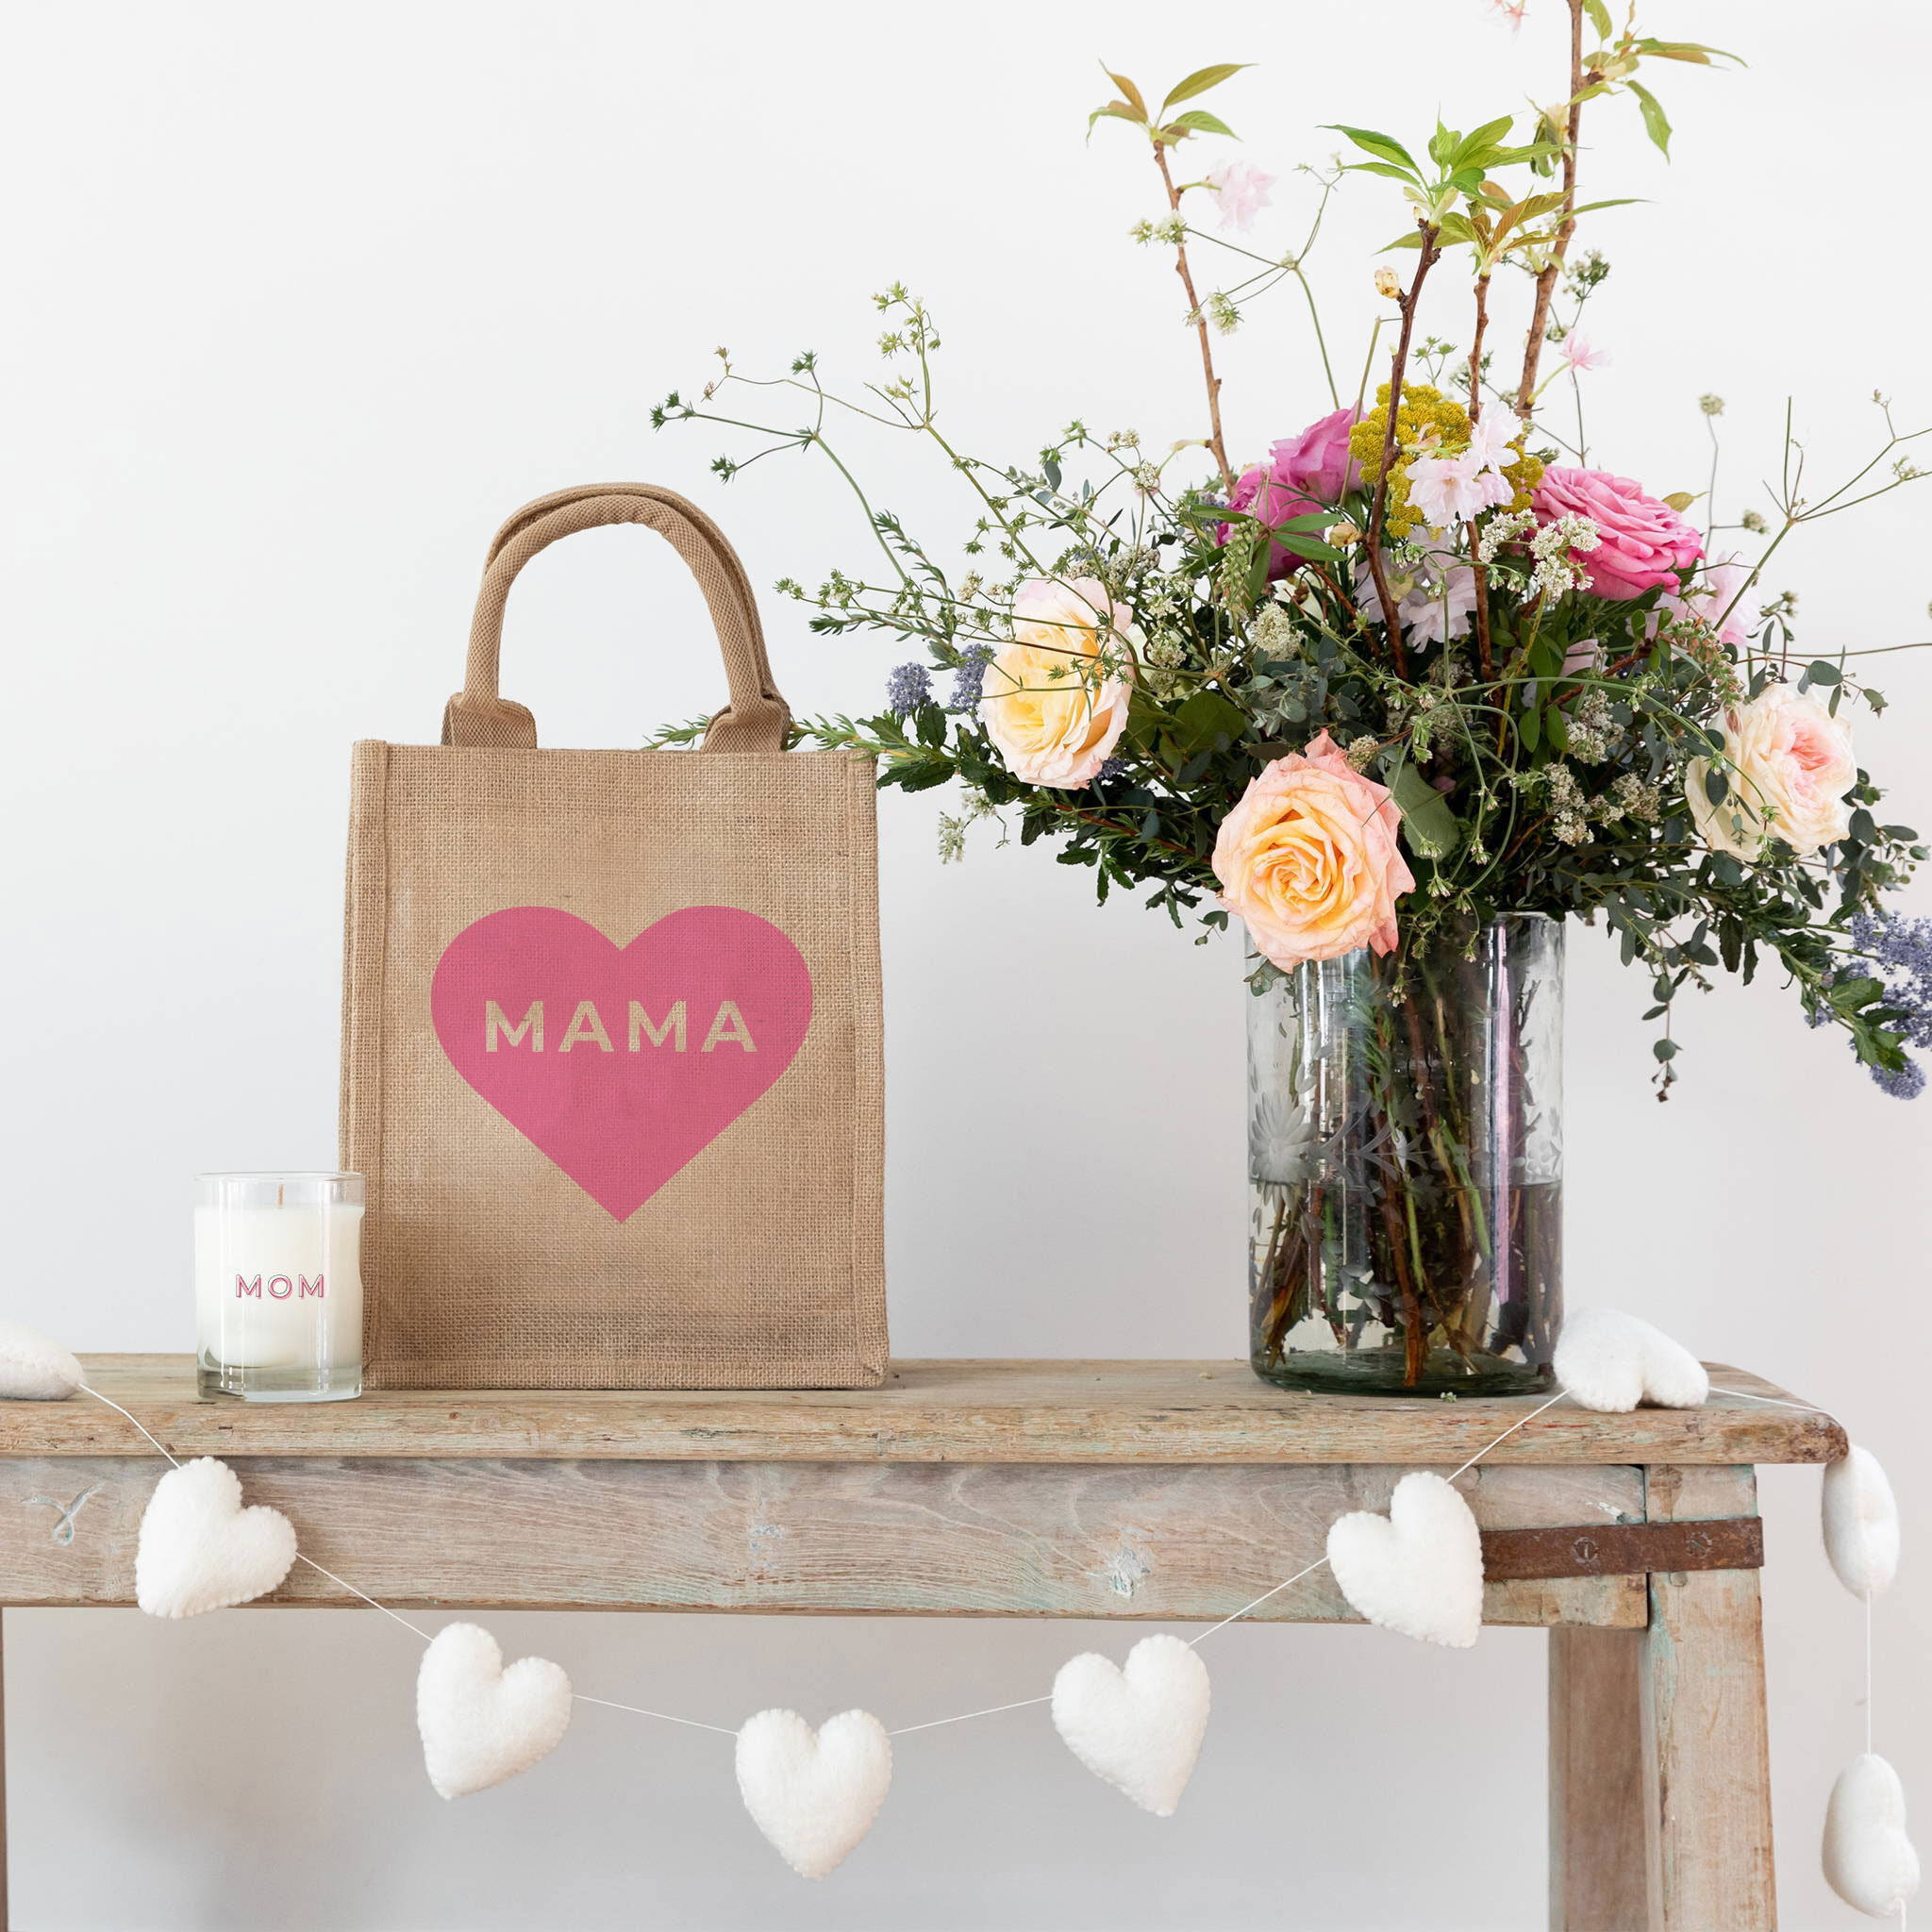 Bulk mother's day gifts- Wholesale to Celebrate Mom